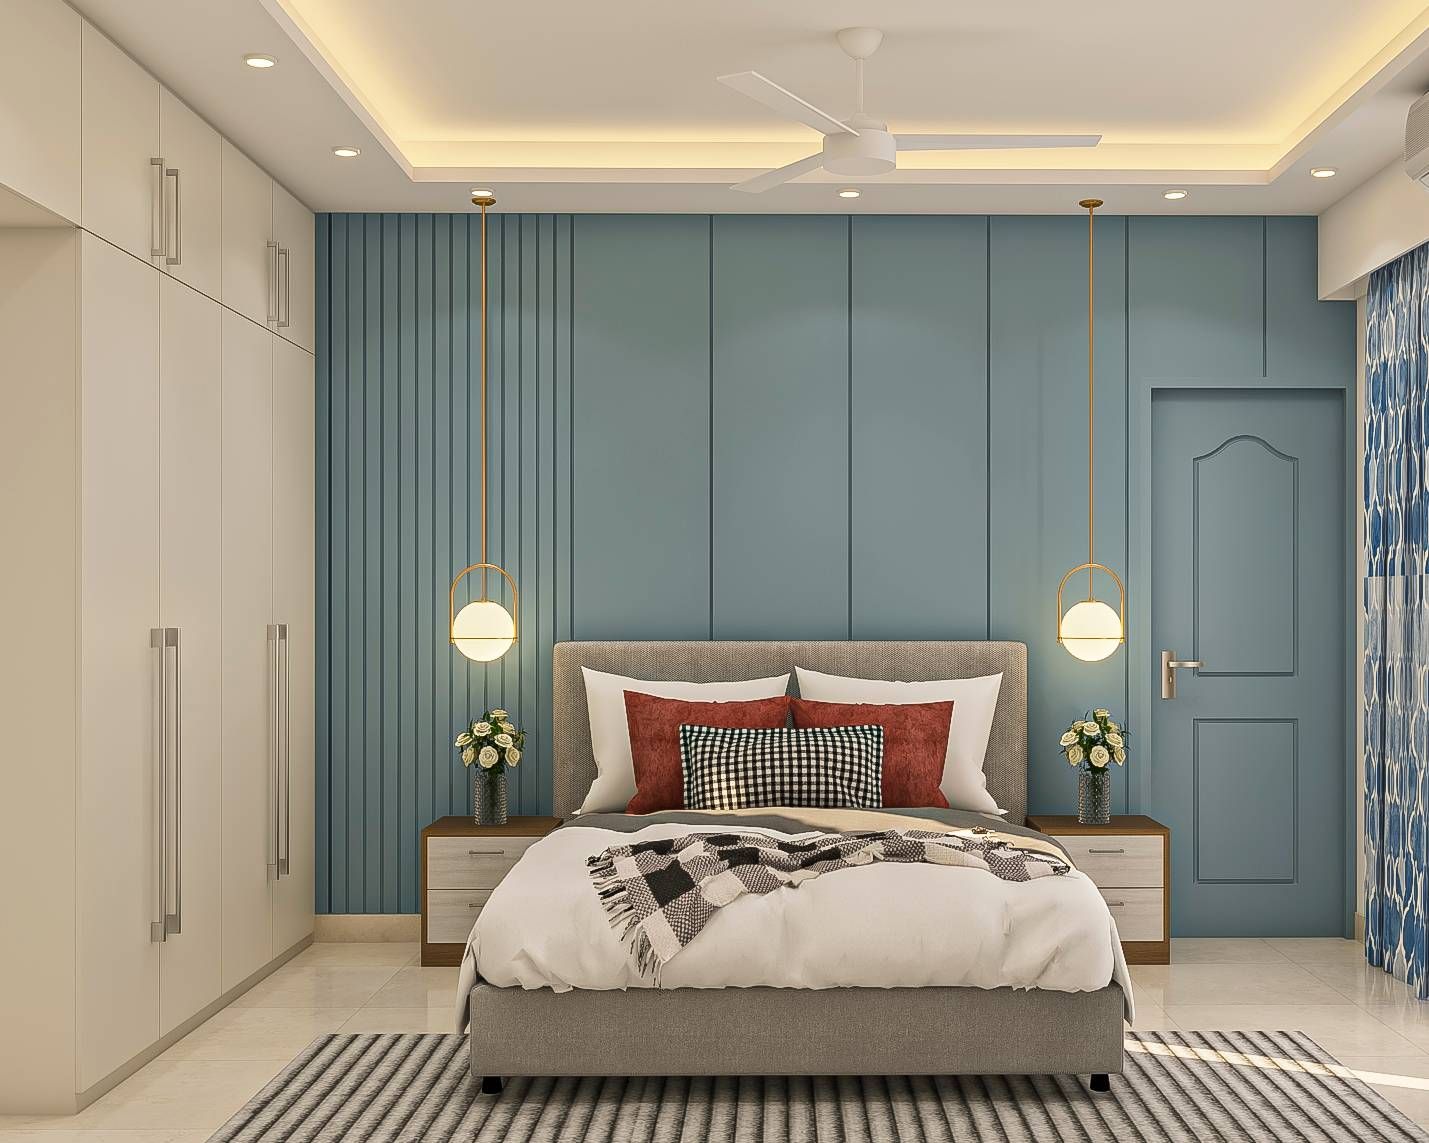 Contemporary Master Bedroom Design With Blue Accent Wall